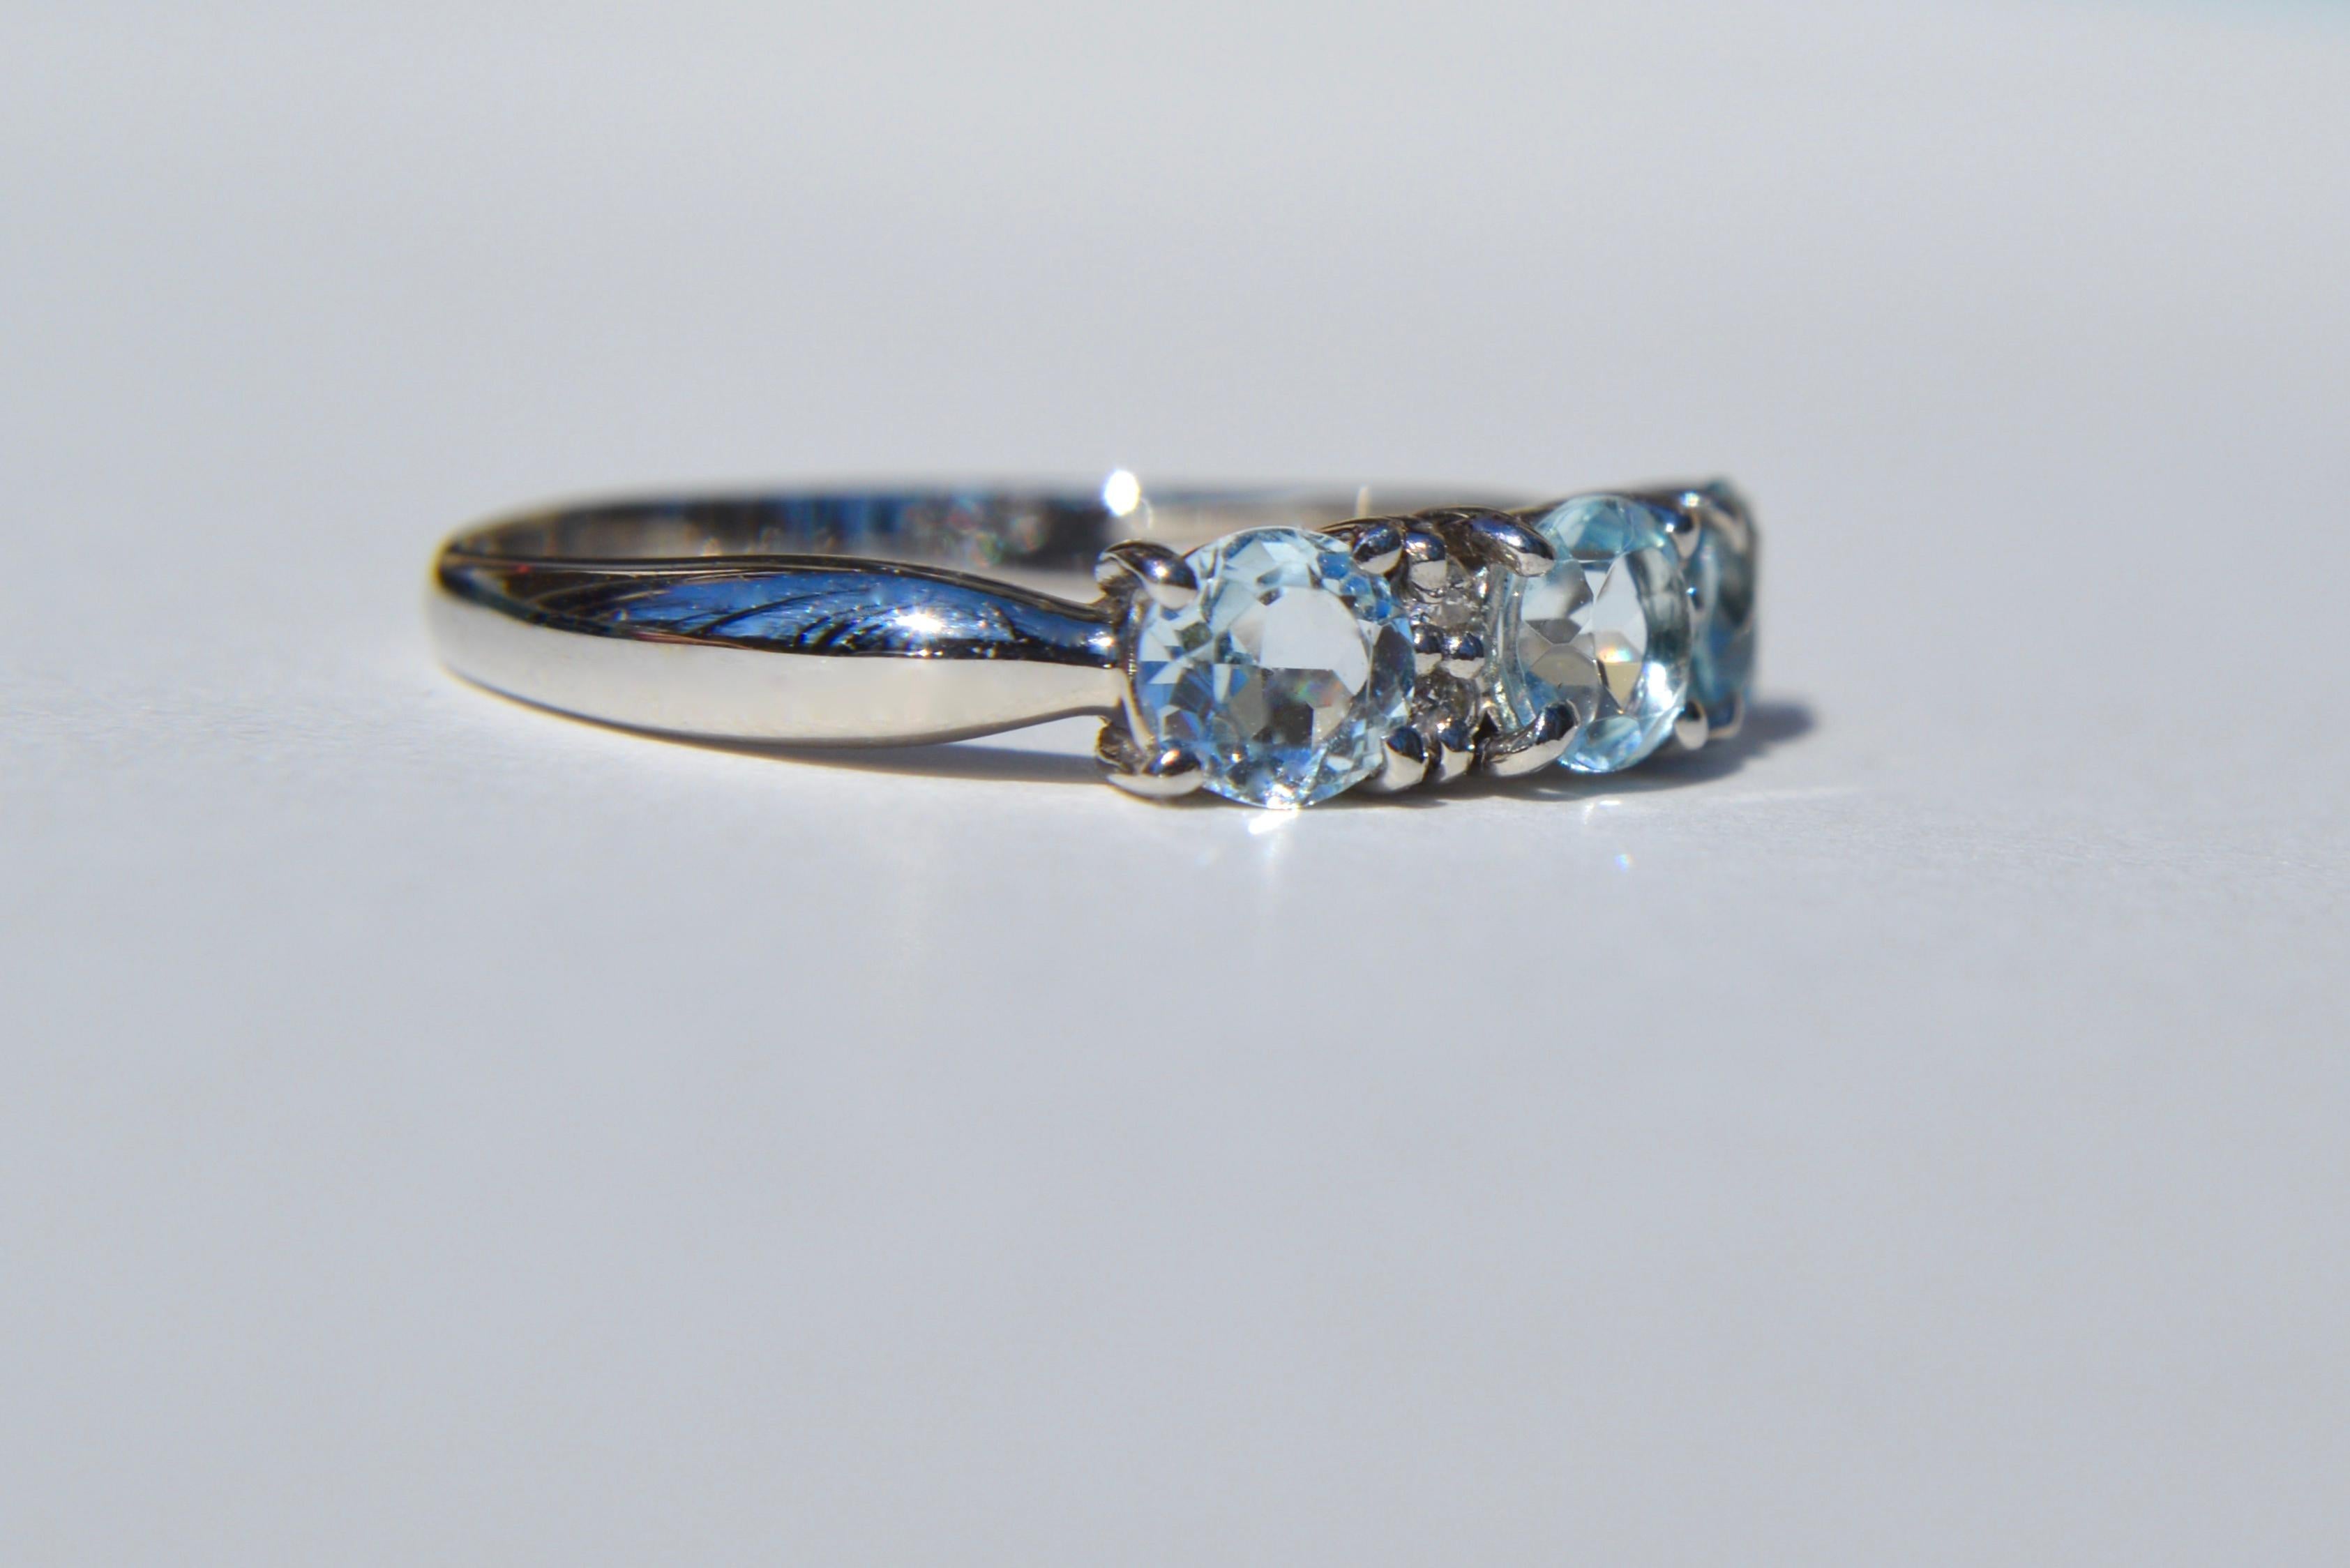 Lovely vintage midcentury circa 1960s natural aquamarine and diamond trinity trilogy ring in solid platinum. Marked PT900 for platinum. Size 6.25, can be resized by a jeweler. Each round cut high quality aquamarine measures 4mm in diameter, .25